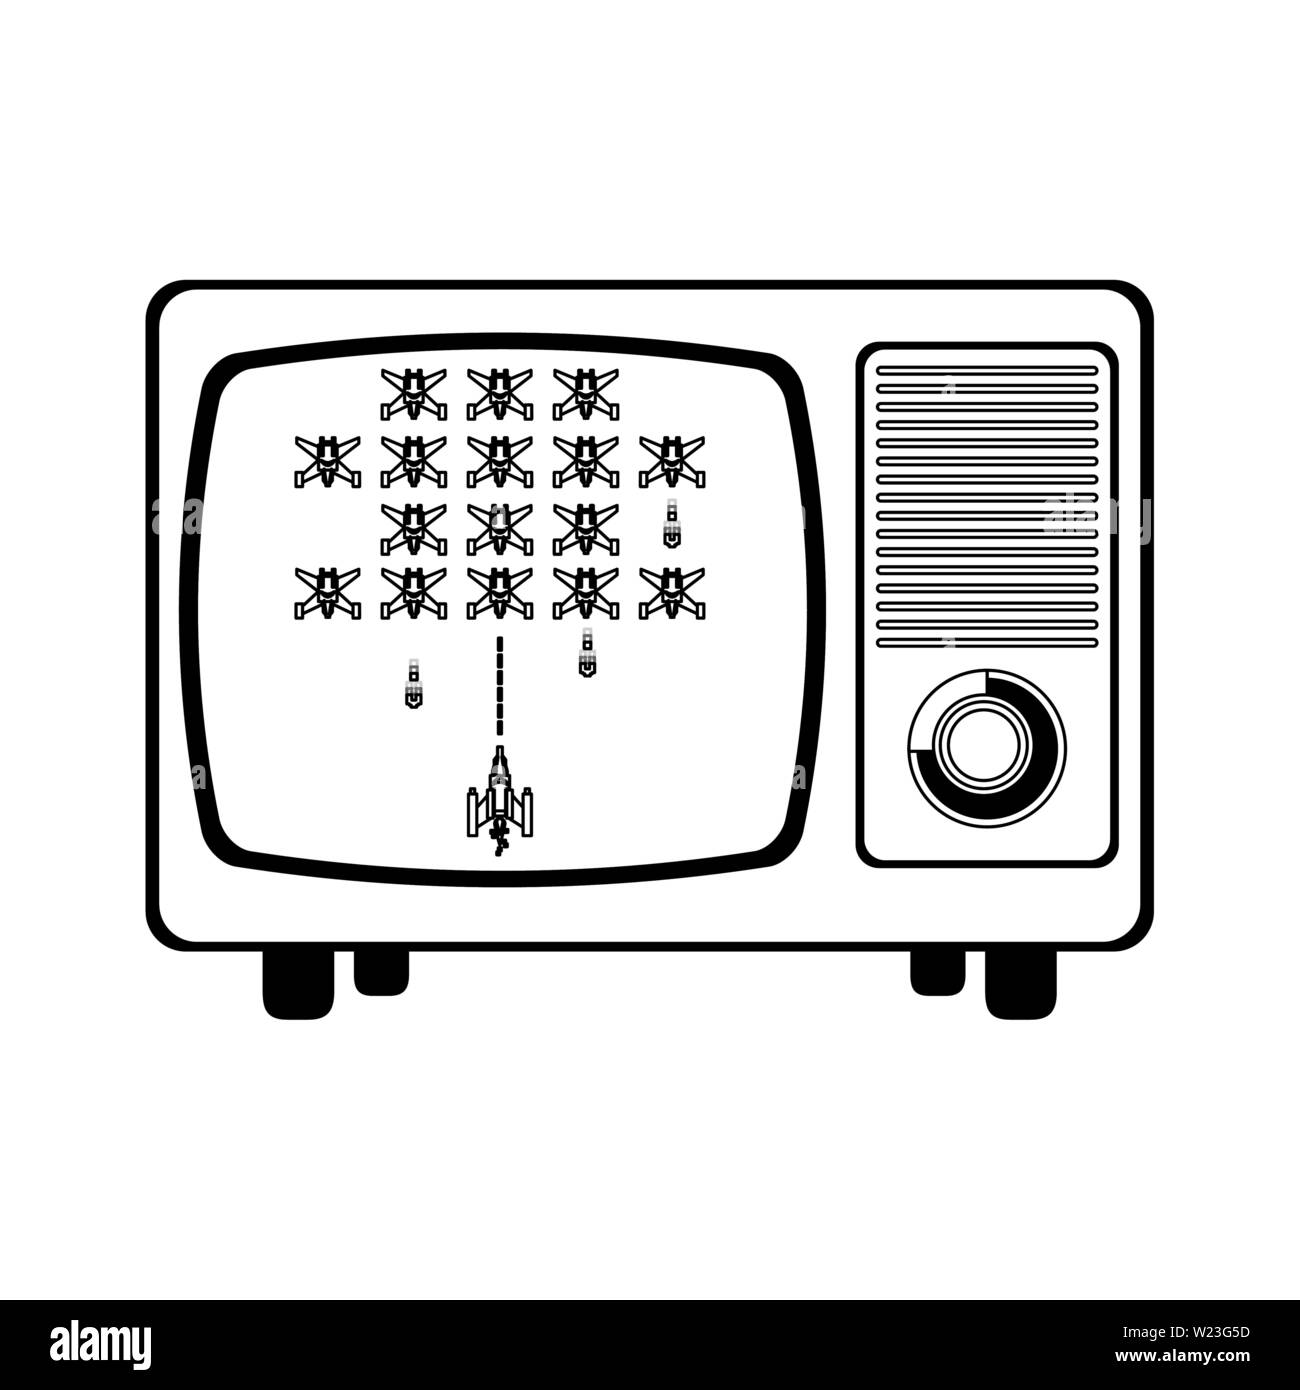 Retro videogame on television screen in black and white Stock Vector